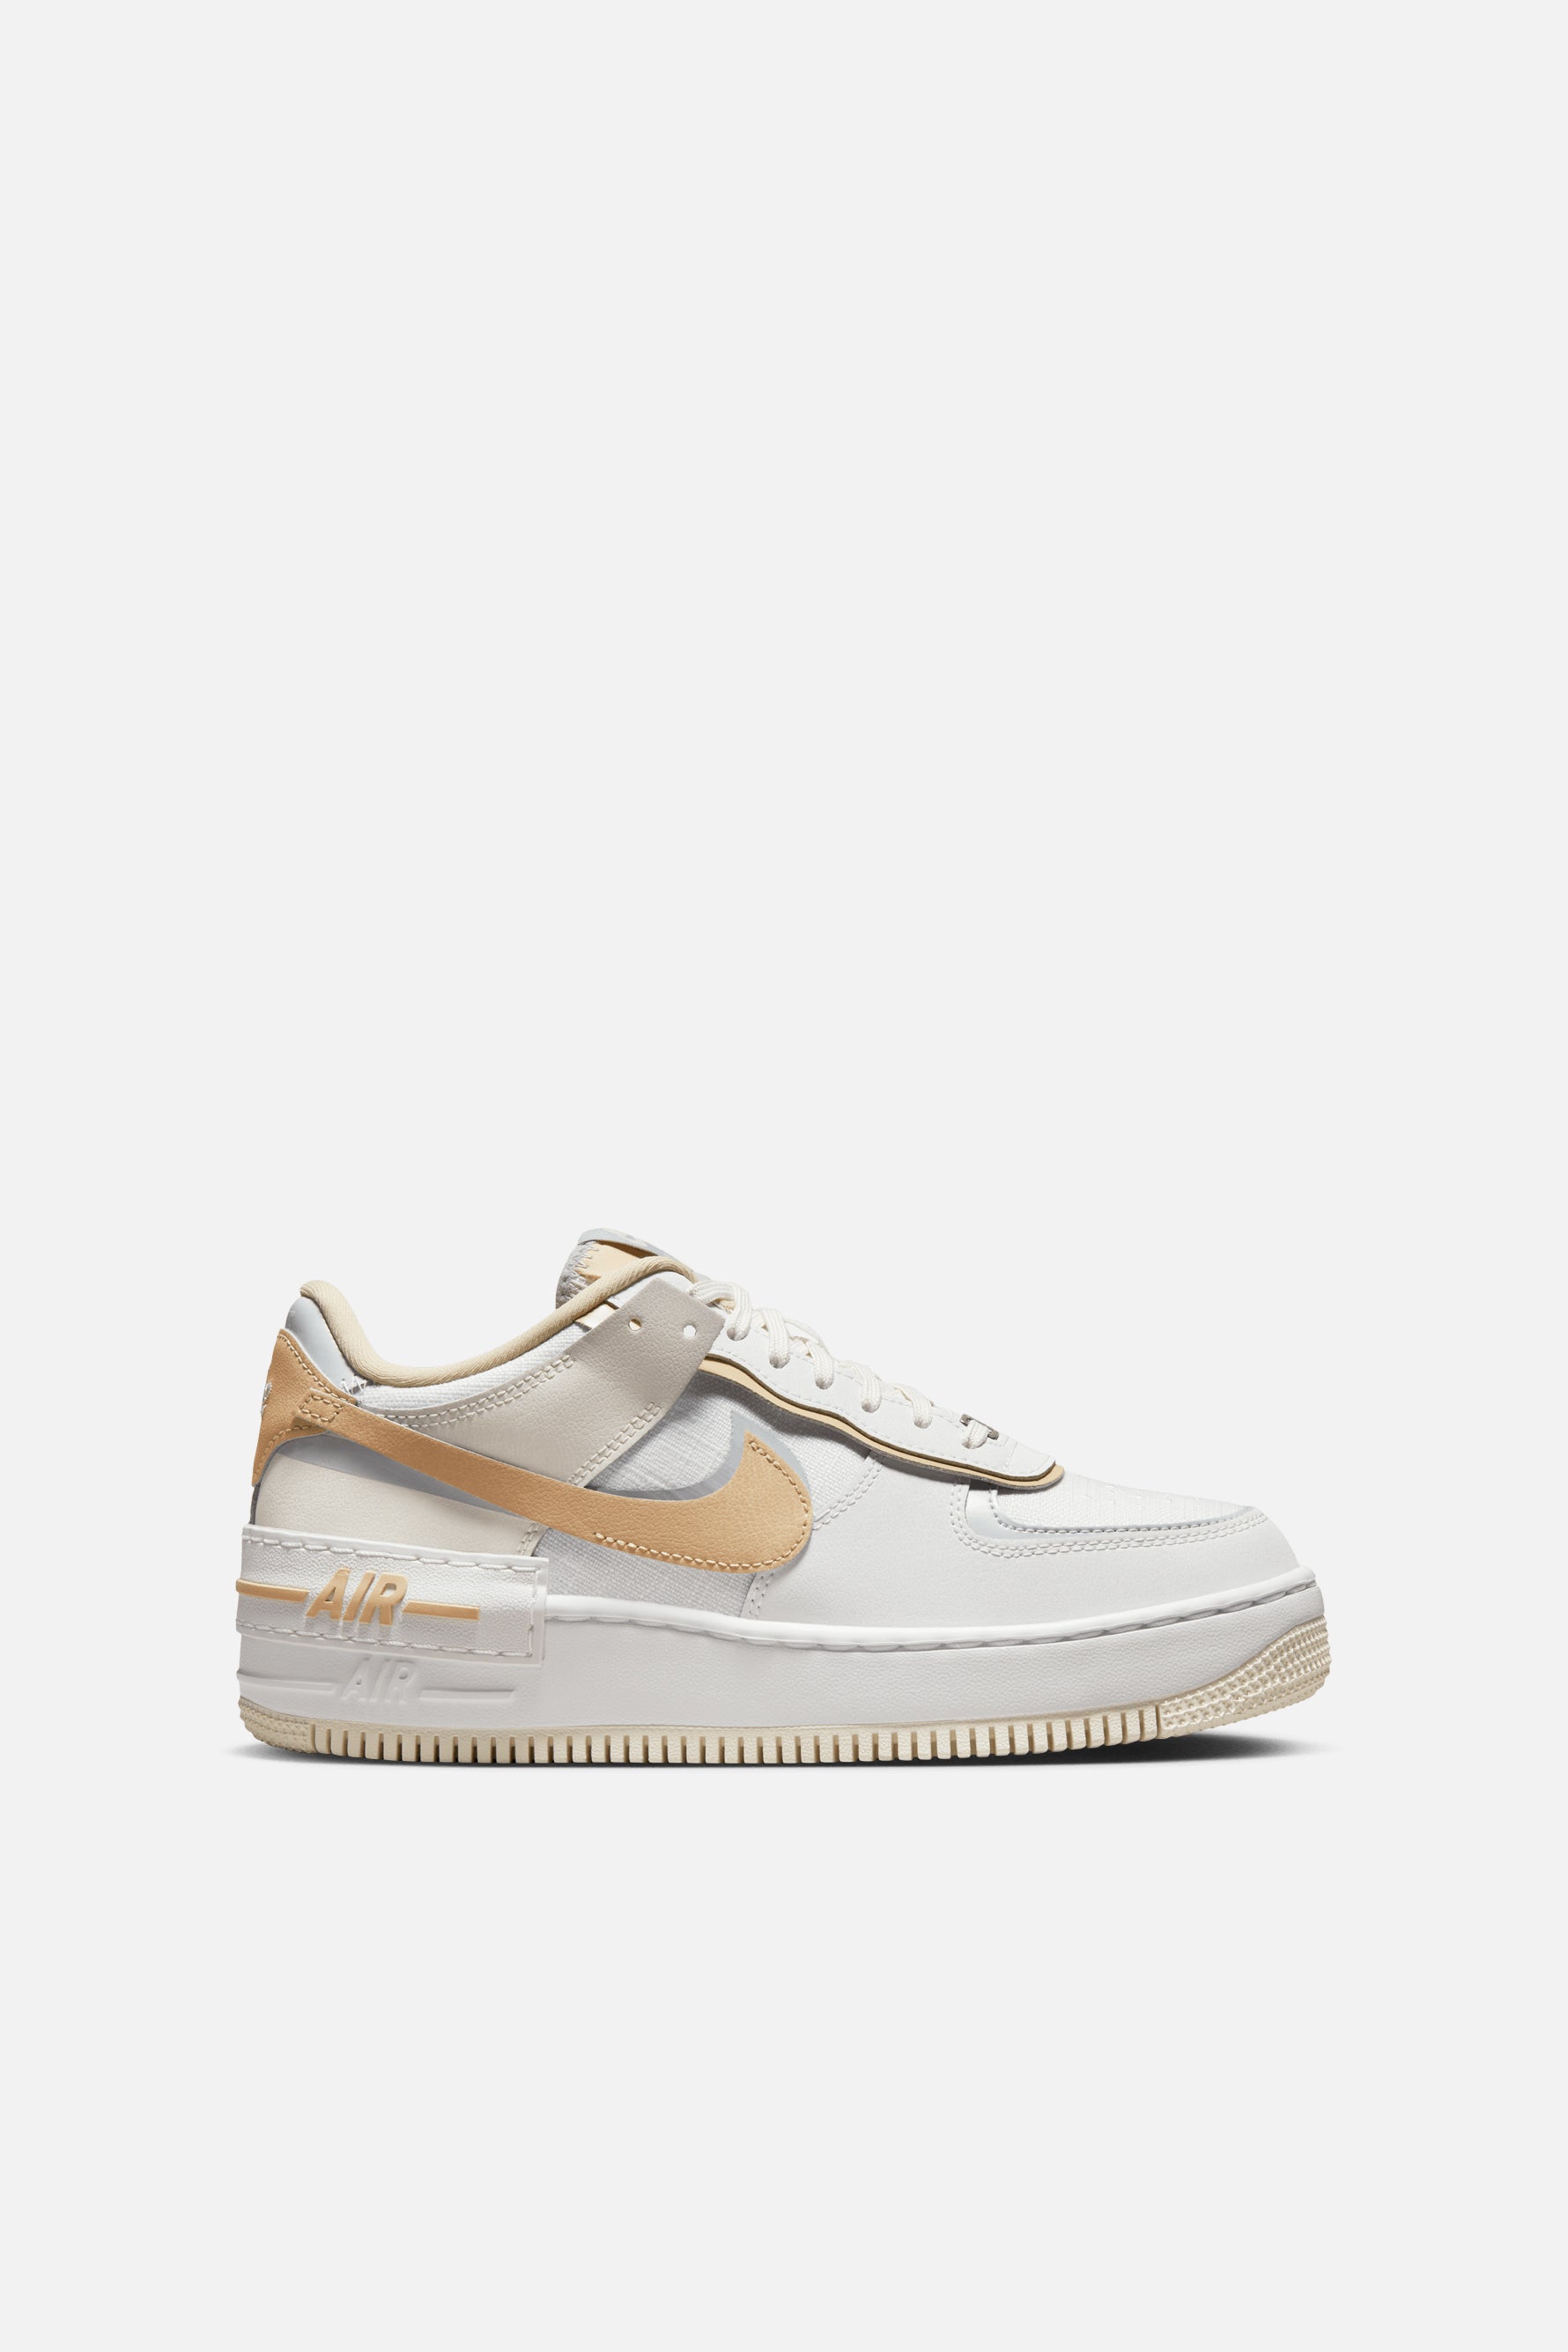 Nike Air Force 1 Low First Use Cream Orange Size 5.5 Women's